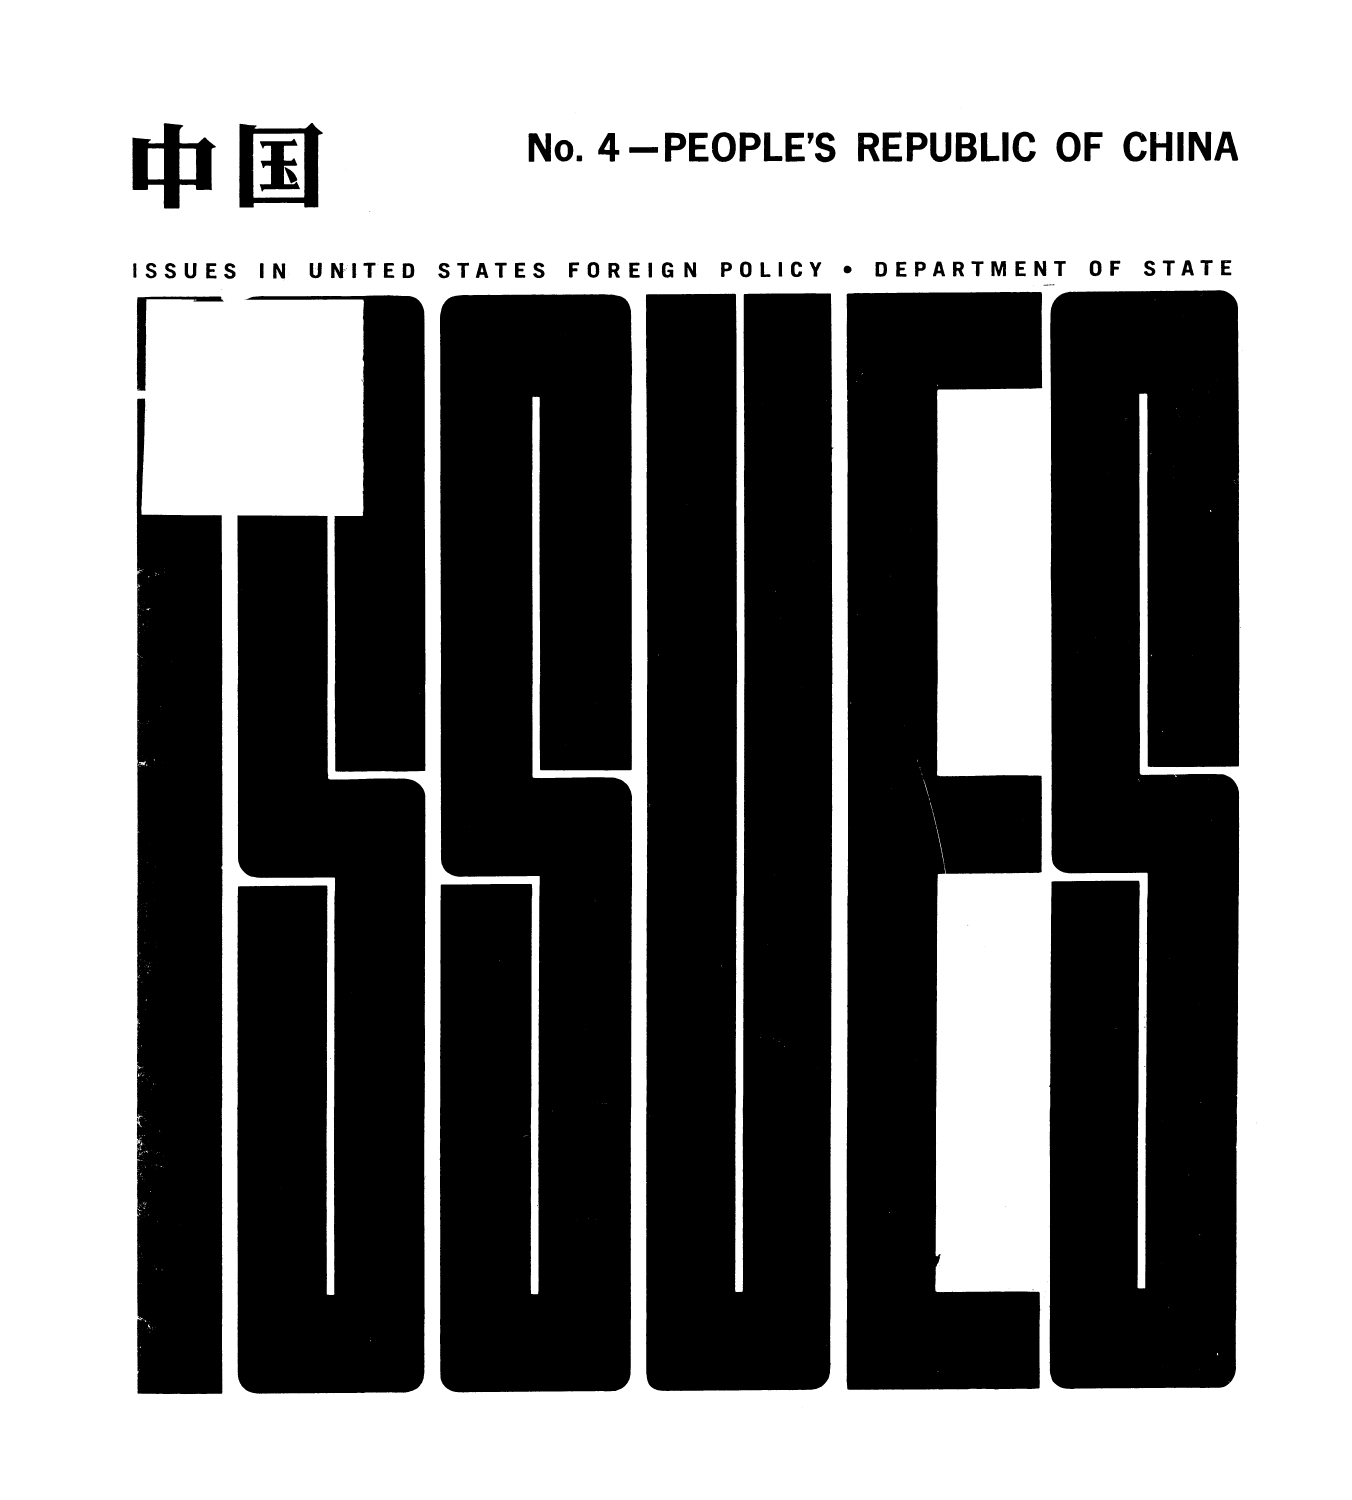 handle is hein.cow/prchina0001 and id is 1 raw text is: No. 4-PEOPLE'S REPUBLIC OF CHINA

ISSUES IN UNITED STATES FOREIGN POLICY * DEPARTMENT OF STATE

I

I

44 lx-l


